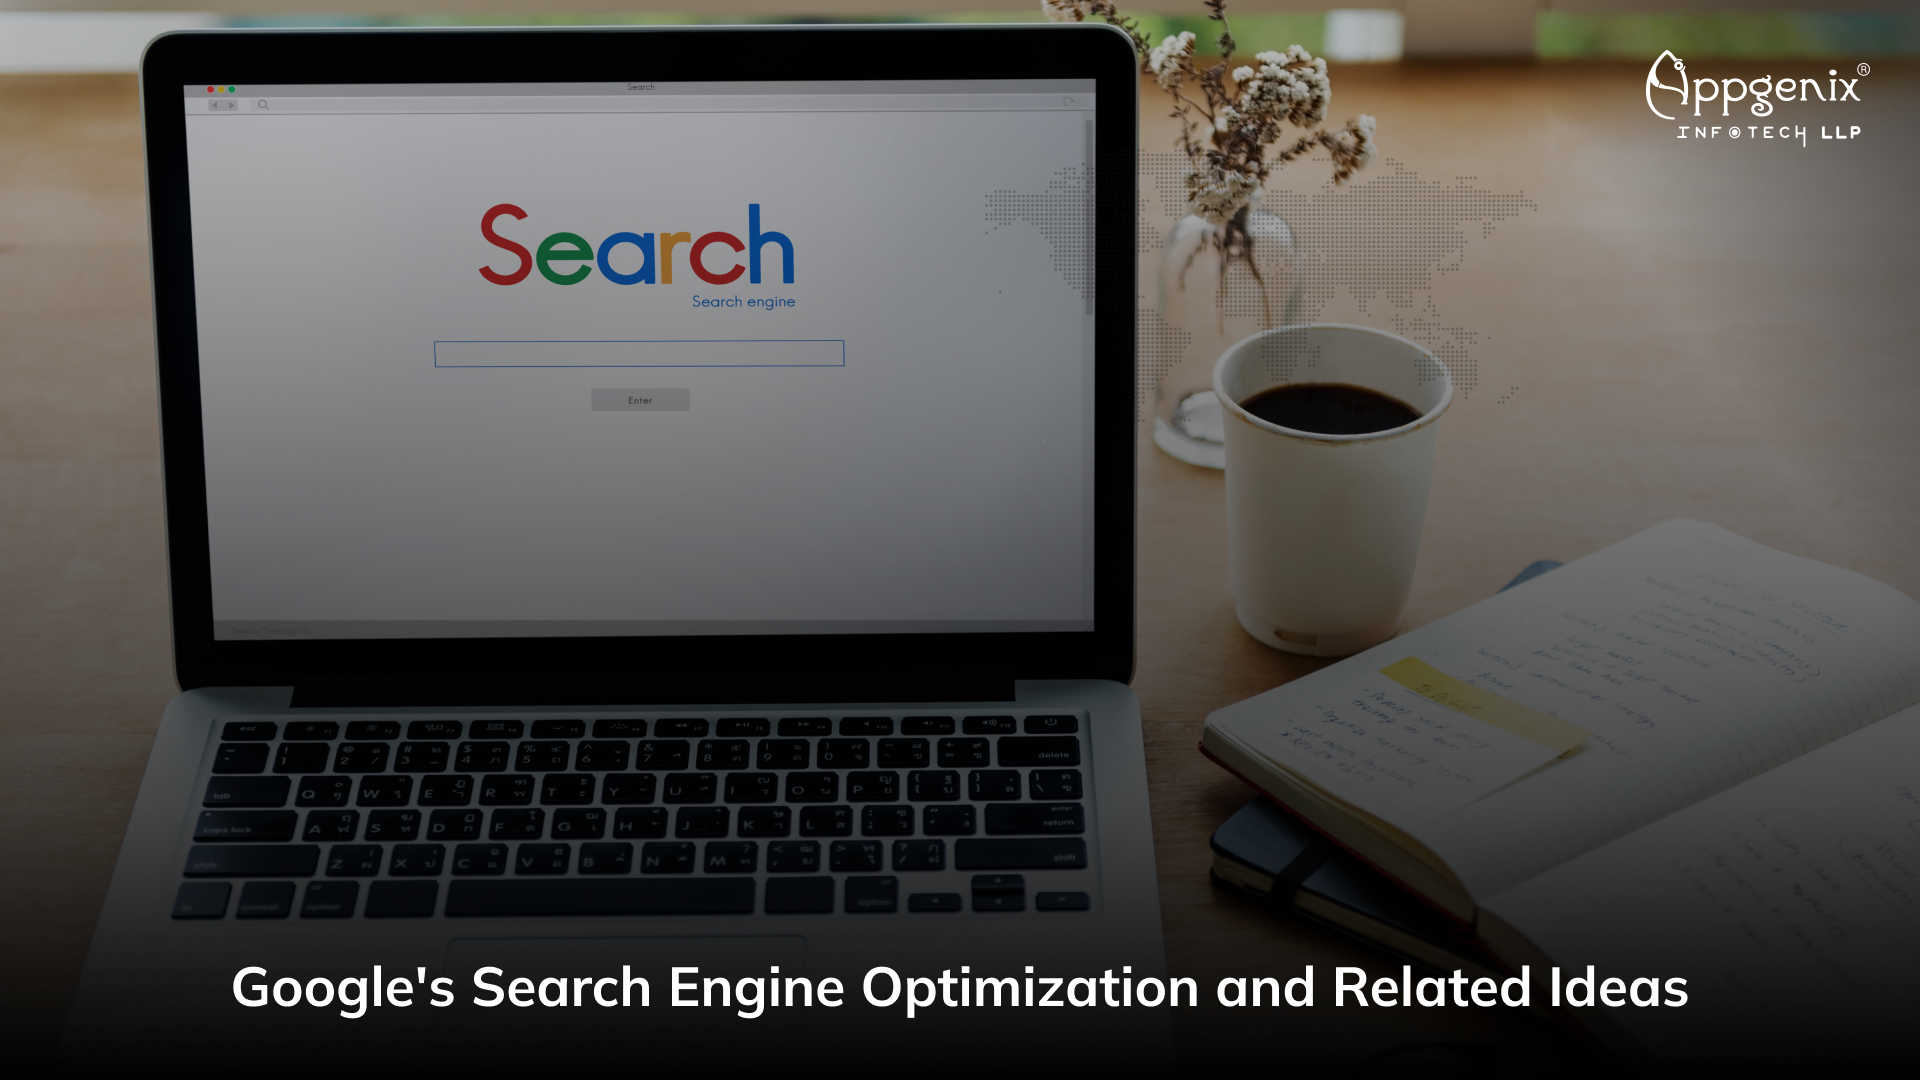 Google's Search Engine Optimization and Related Ideas